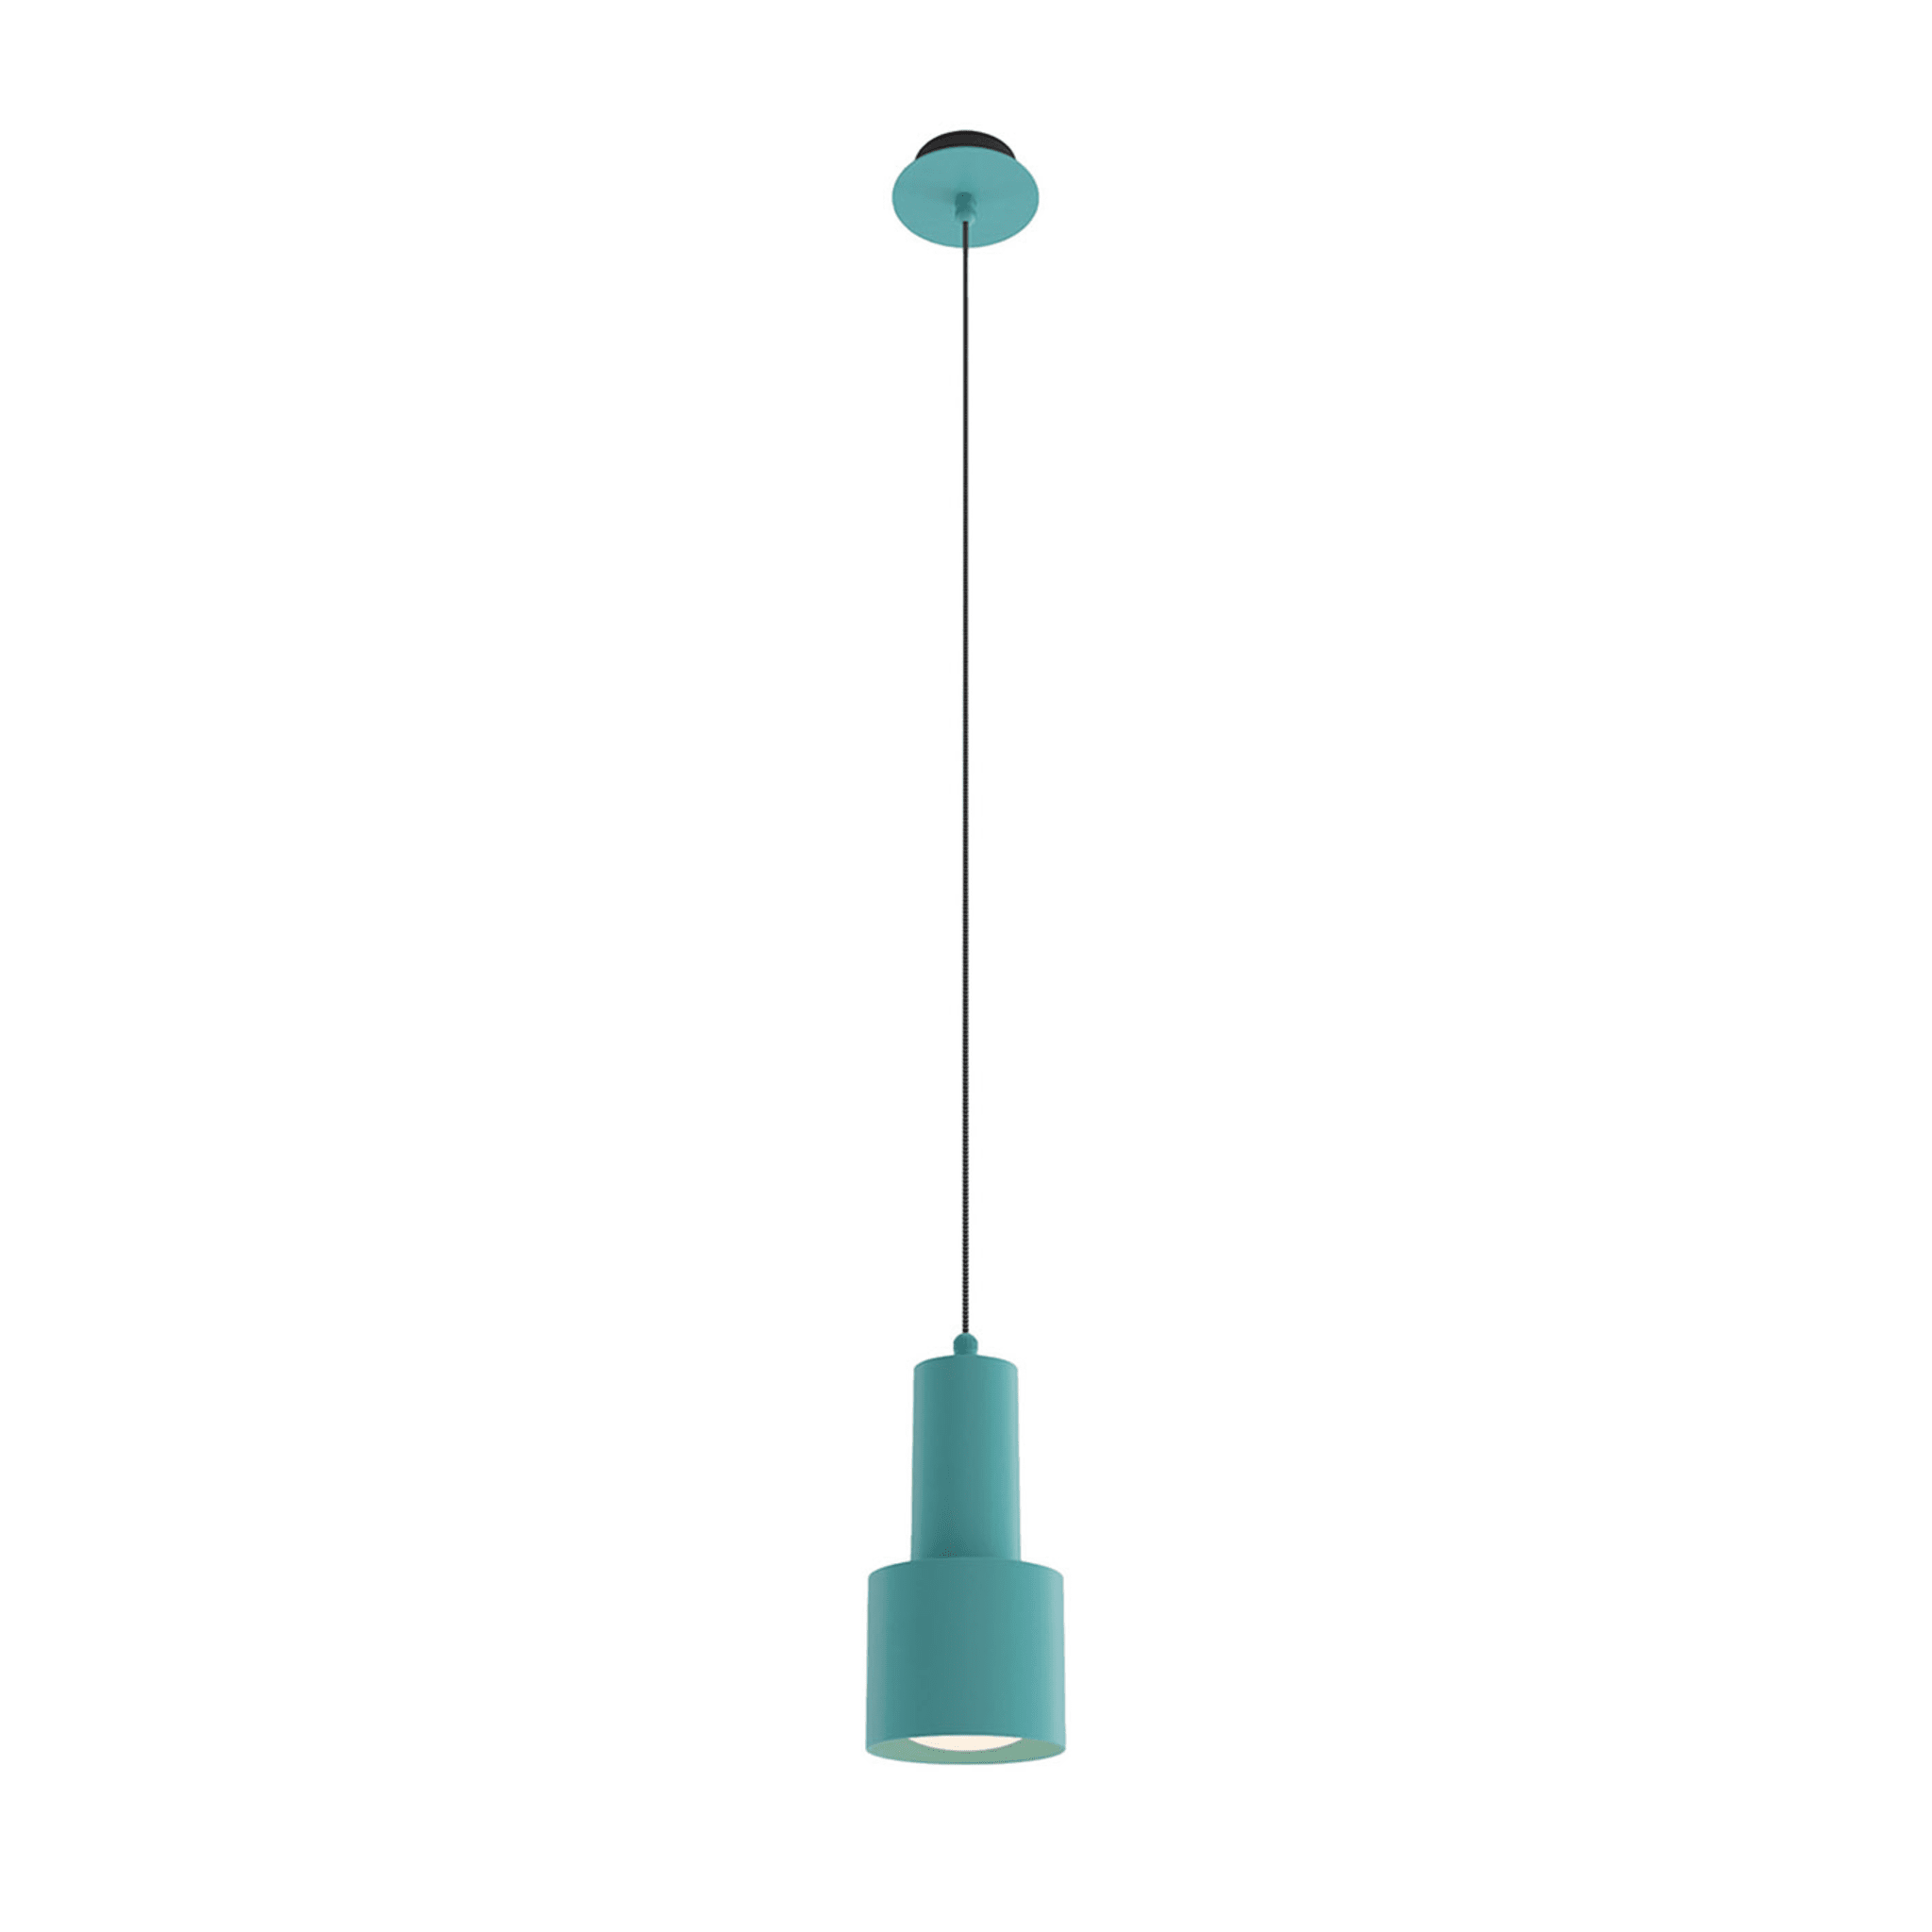 Light Gallery Luxury GP Light-Green Pendant Lamp by Marco Pollice - Main view